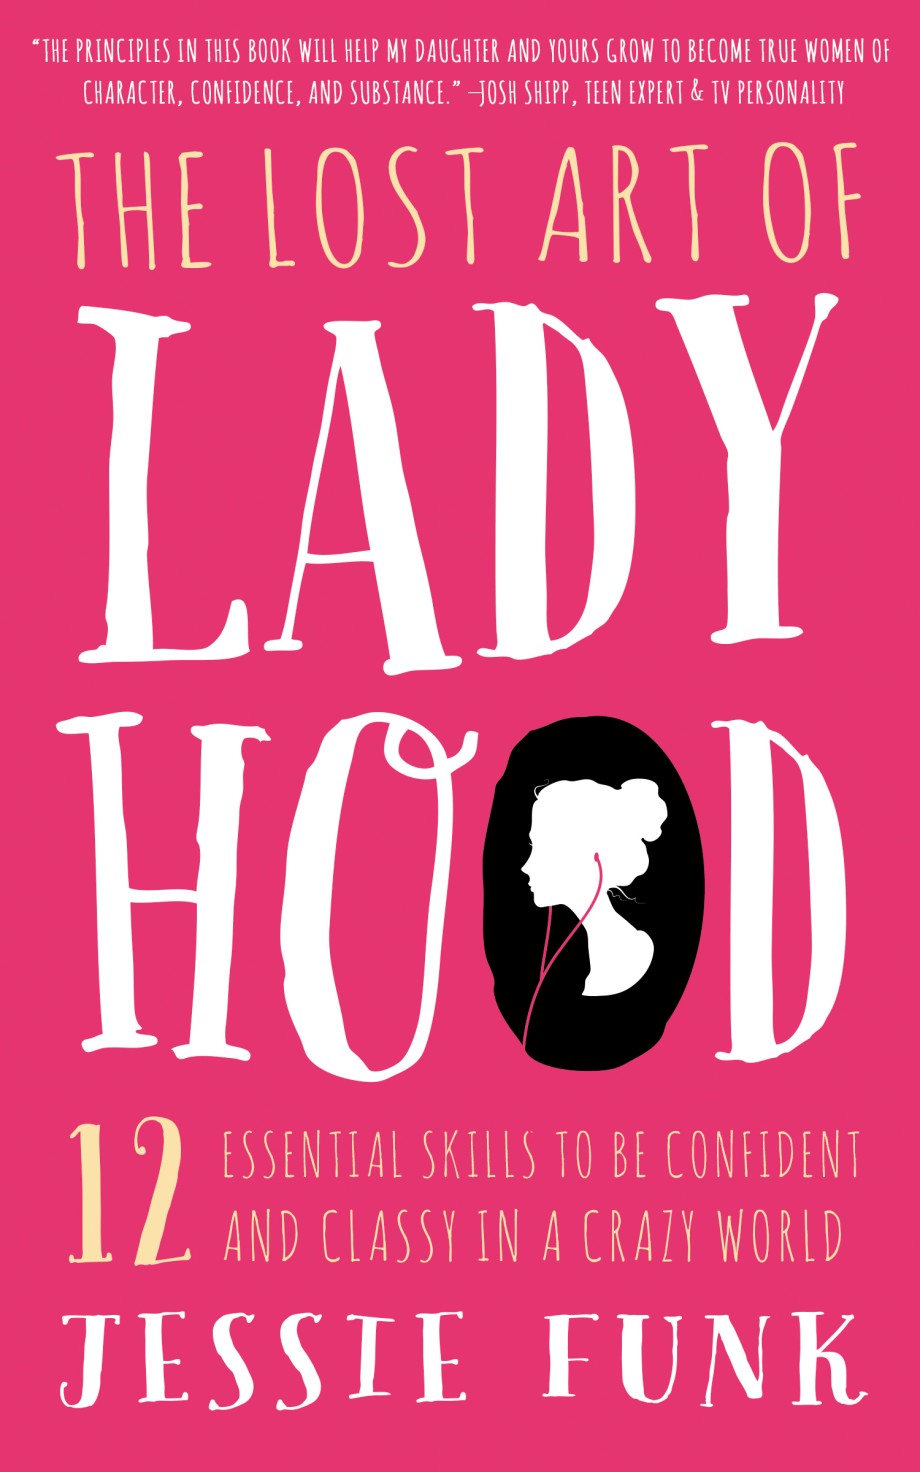 Lost Art of Ladyhood 12 Essential Skills to be Confident & Classy in a Crazy World